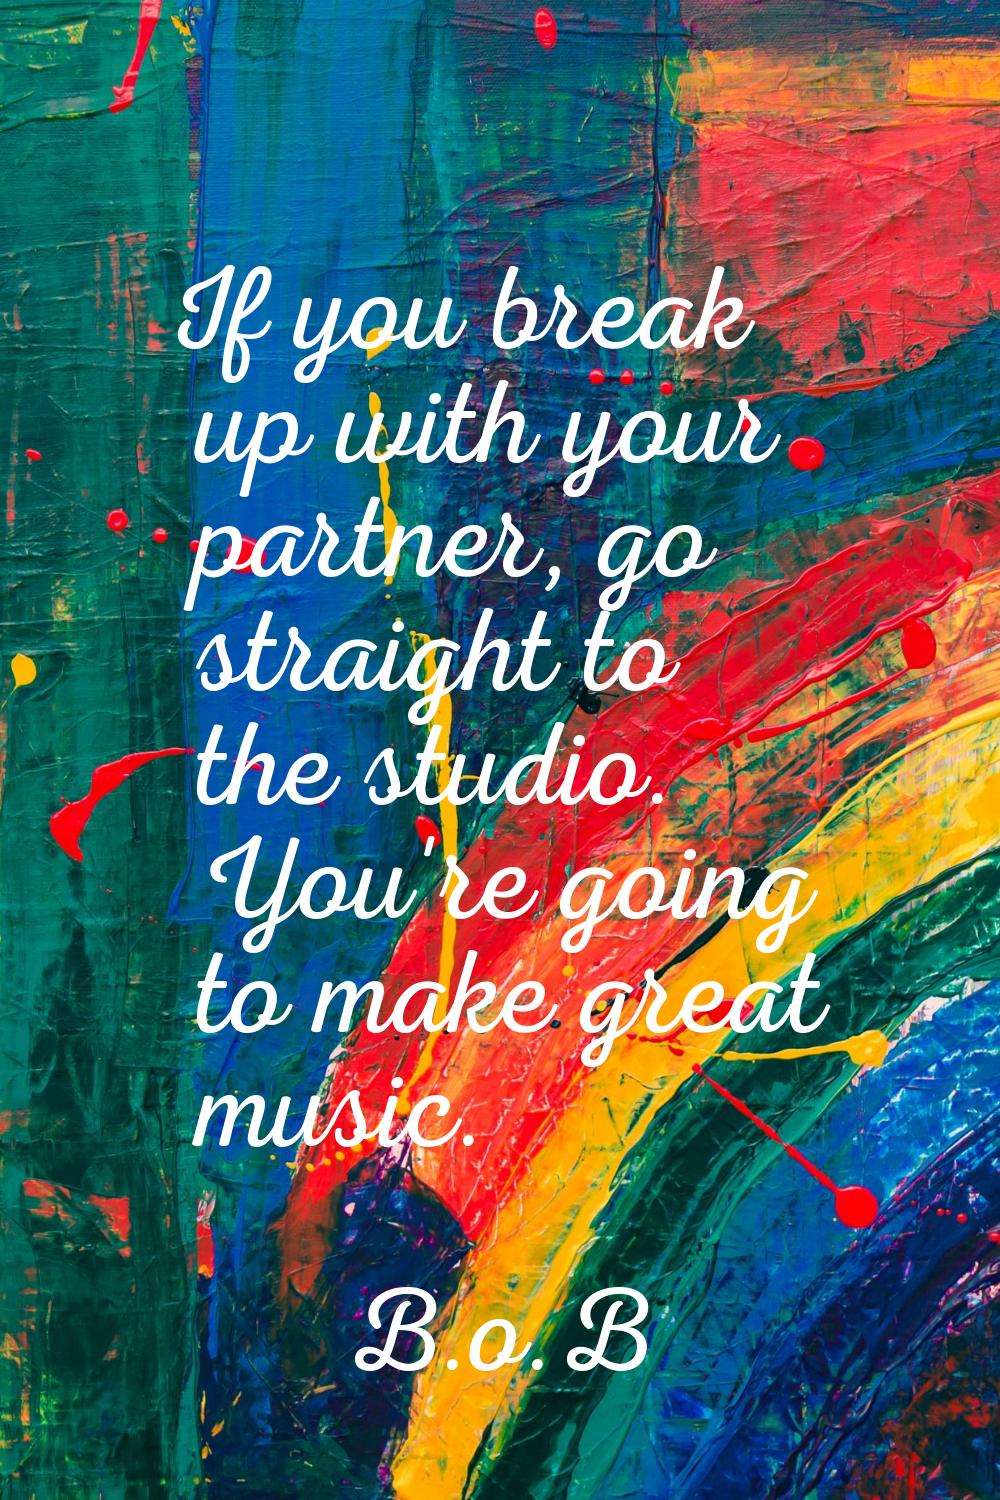 If you break up with your partner, go straight to the studio. You're going to make great music.